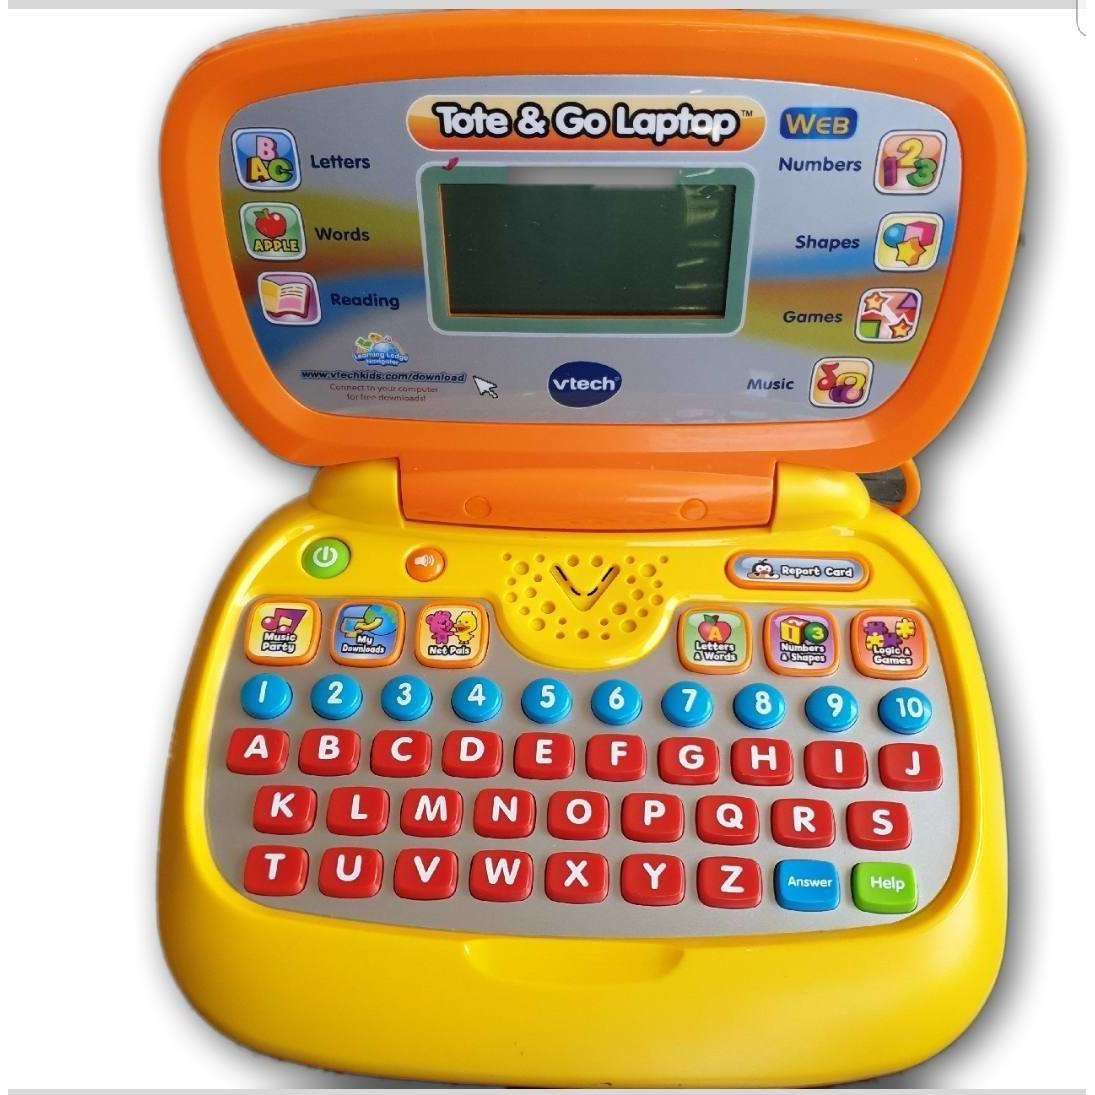 Vtech Tote and Go Laptop with Web Connect, Orange Product